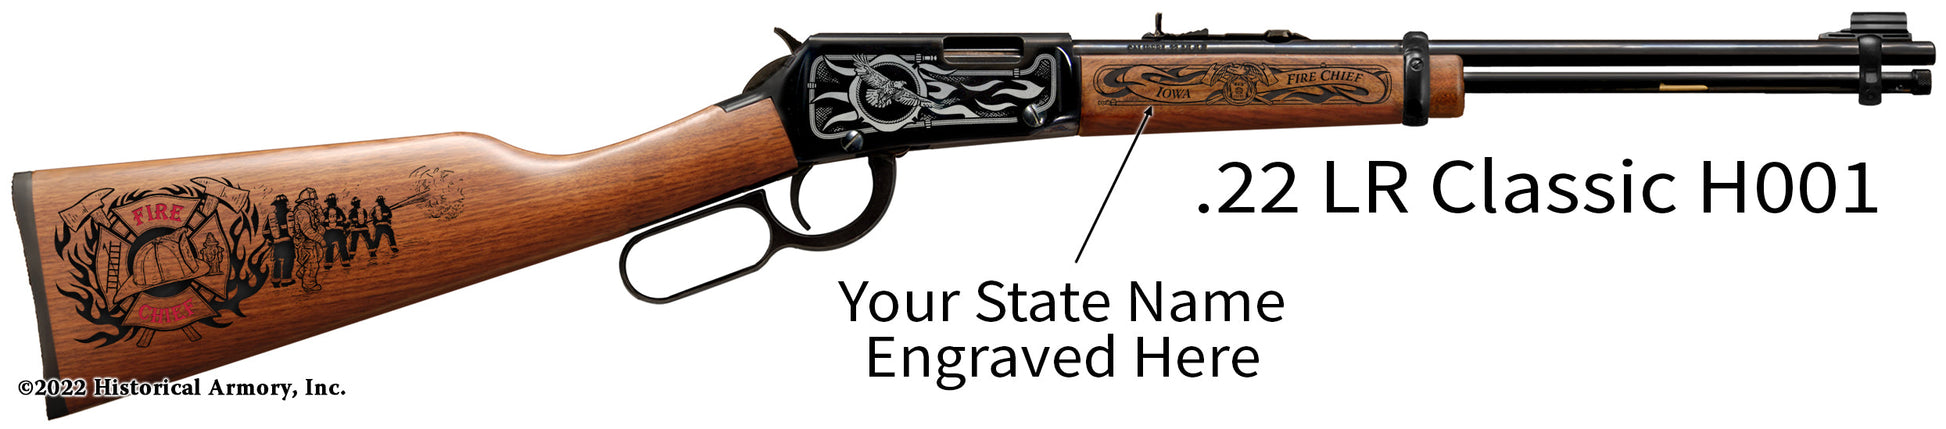 Fire Chief Engraved Rifle Limited Edition